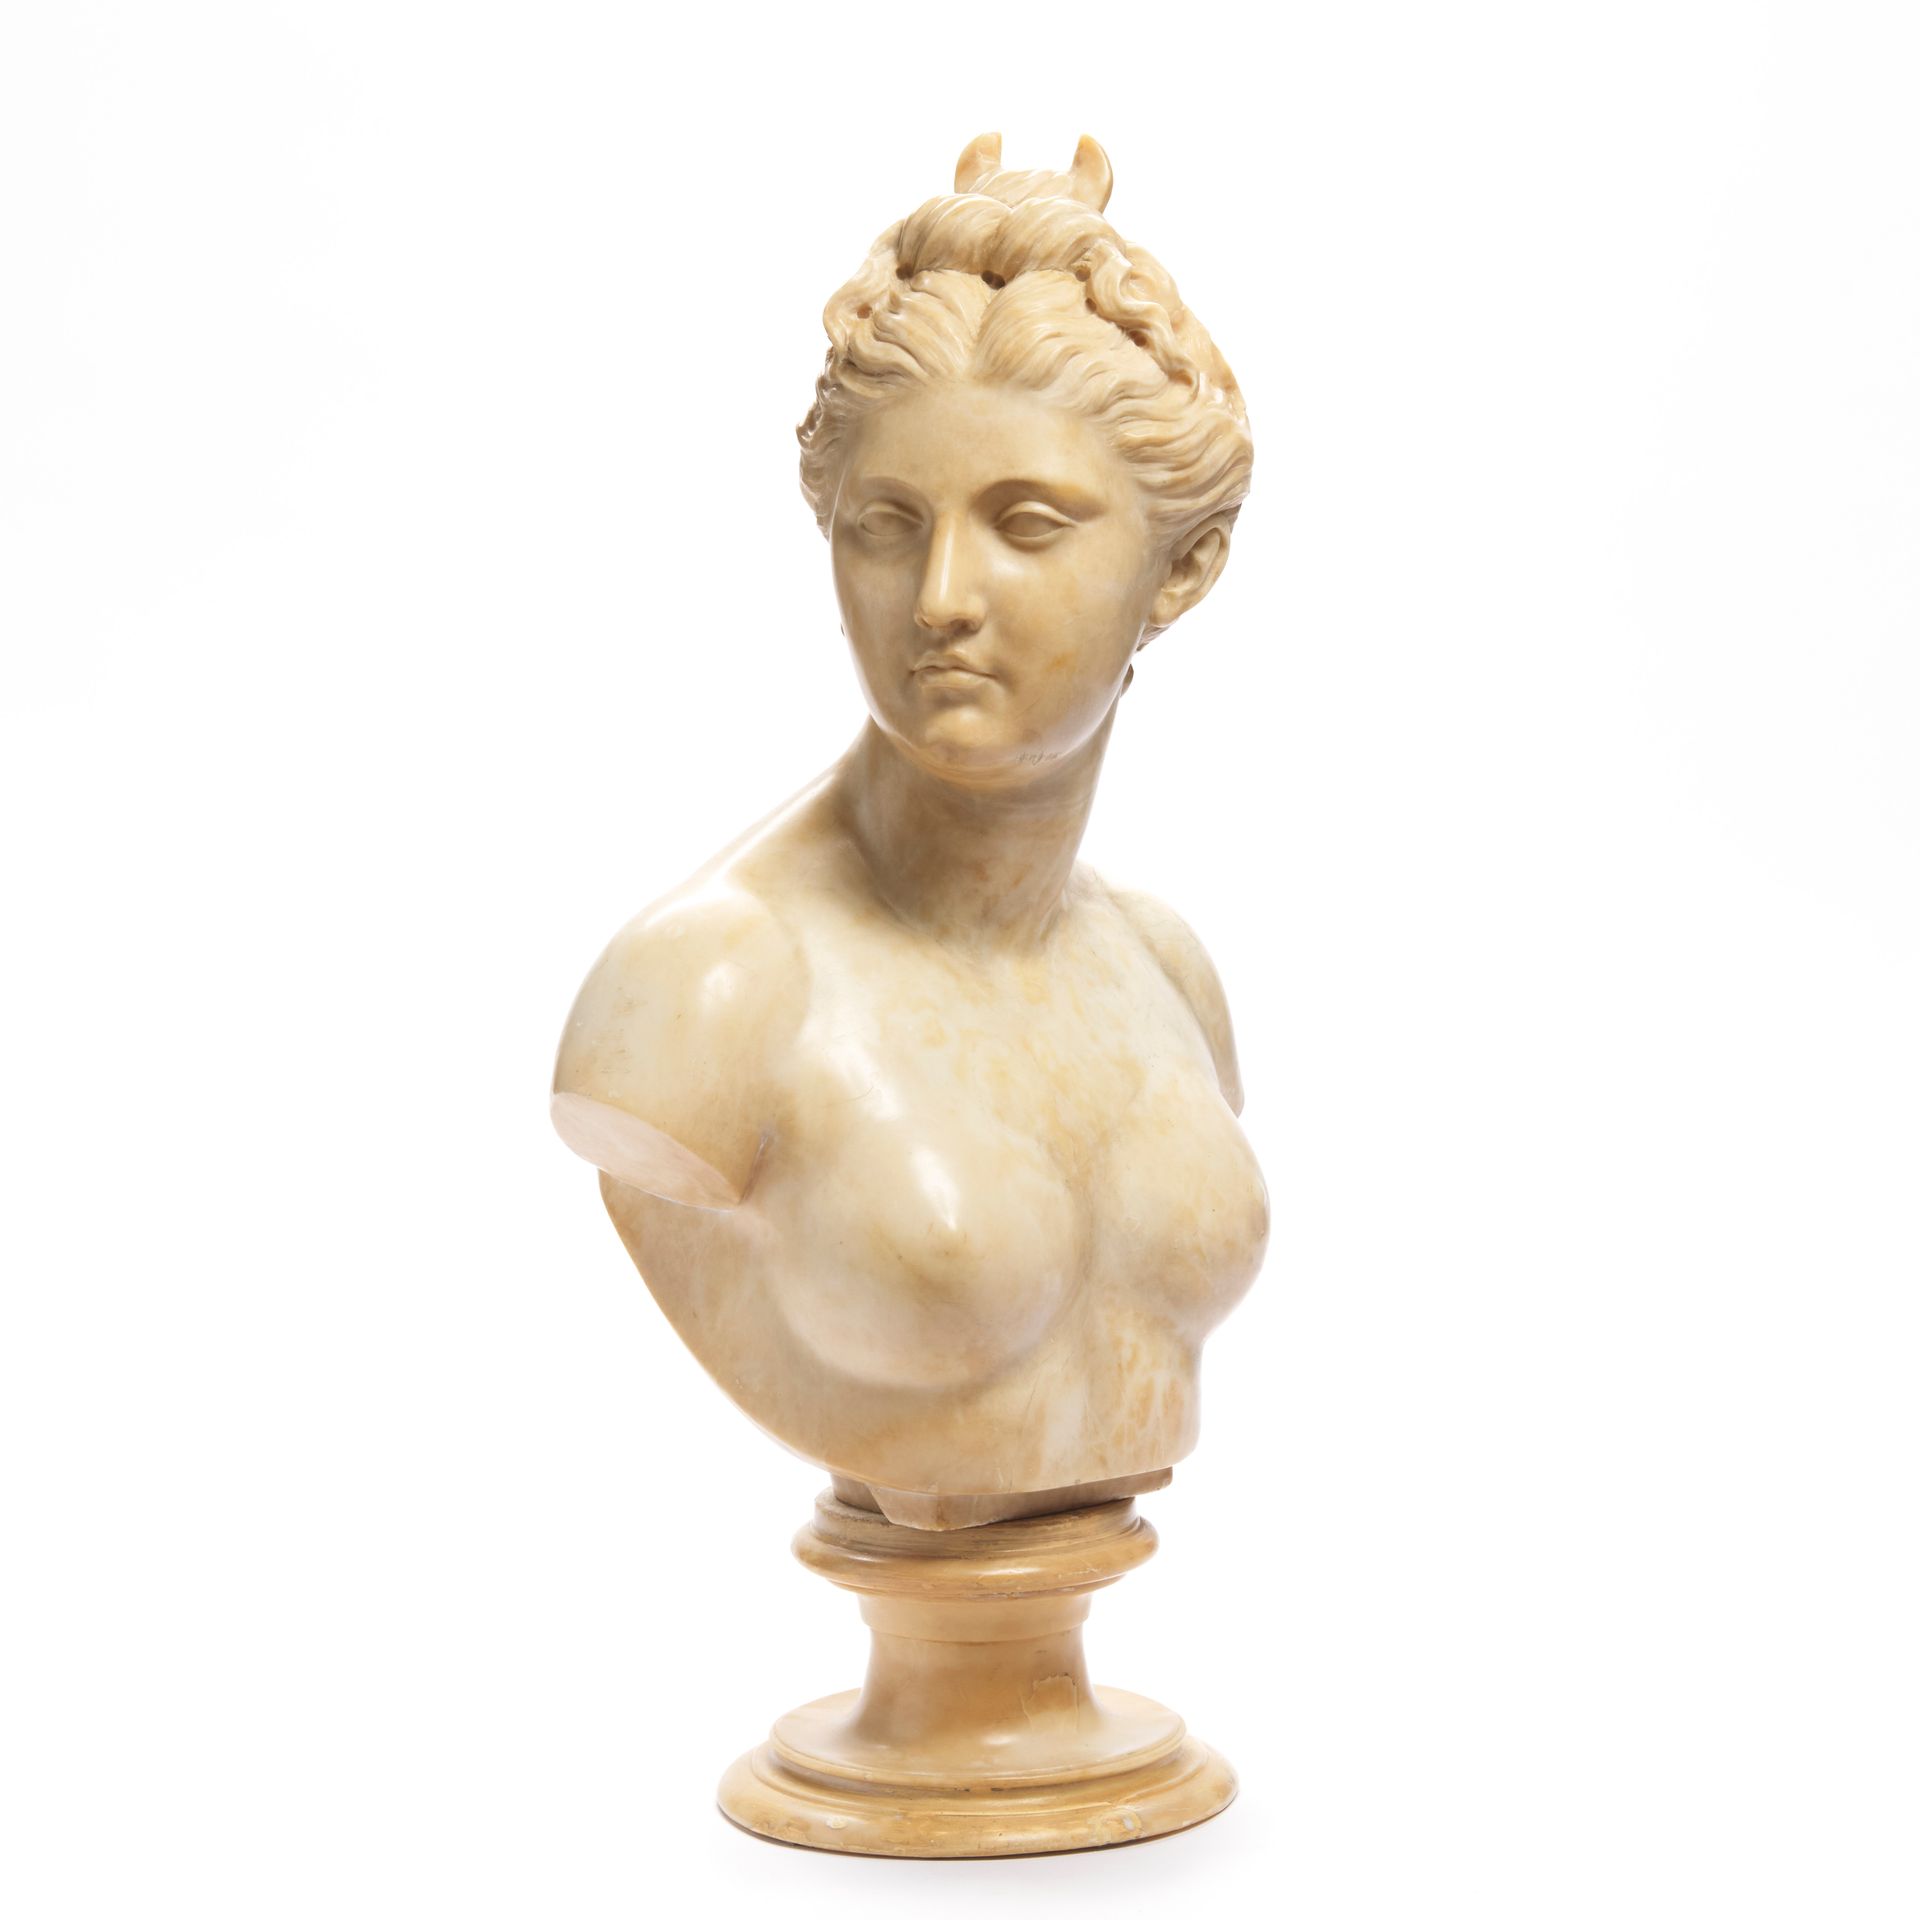 Null French school of the 19th century.
Bust of Diana on pedestal.
Soft marble (&hellip;